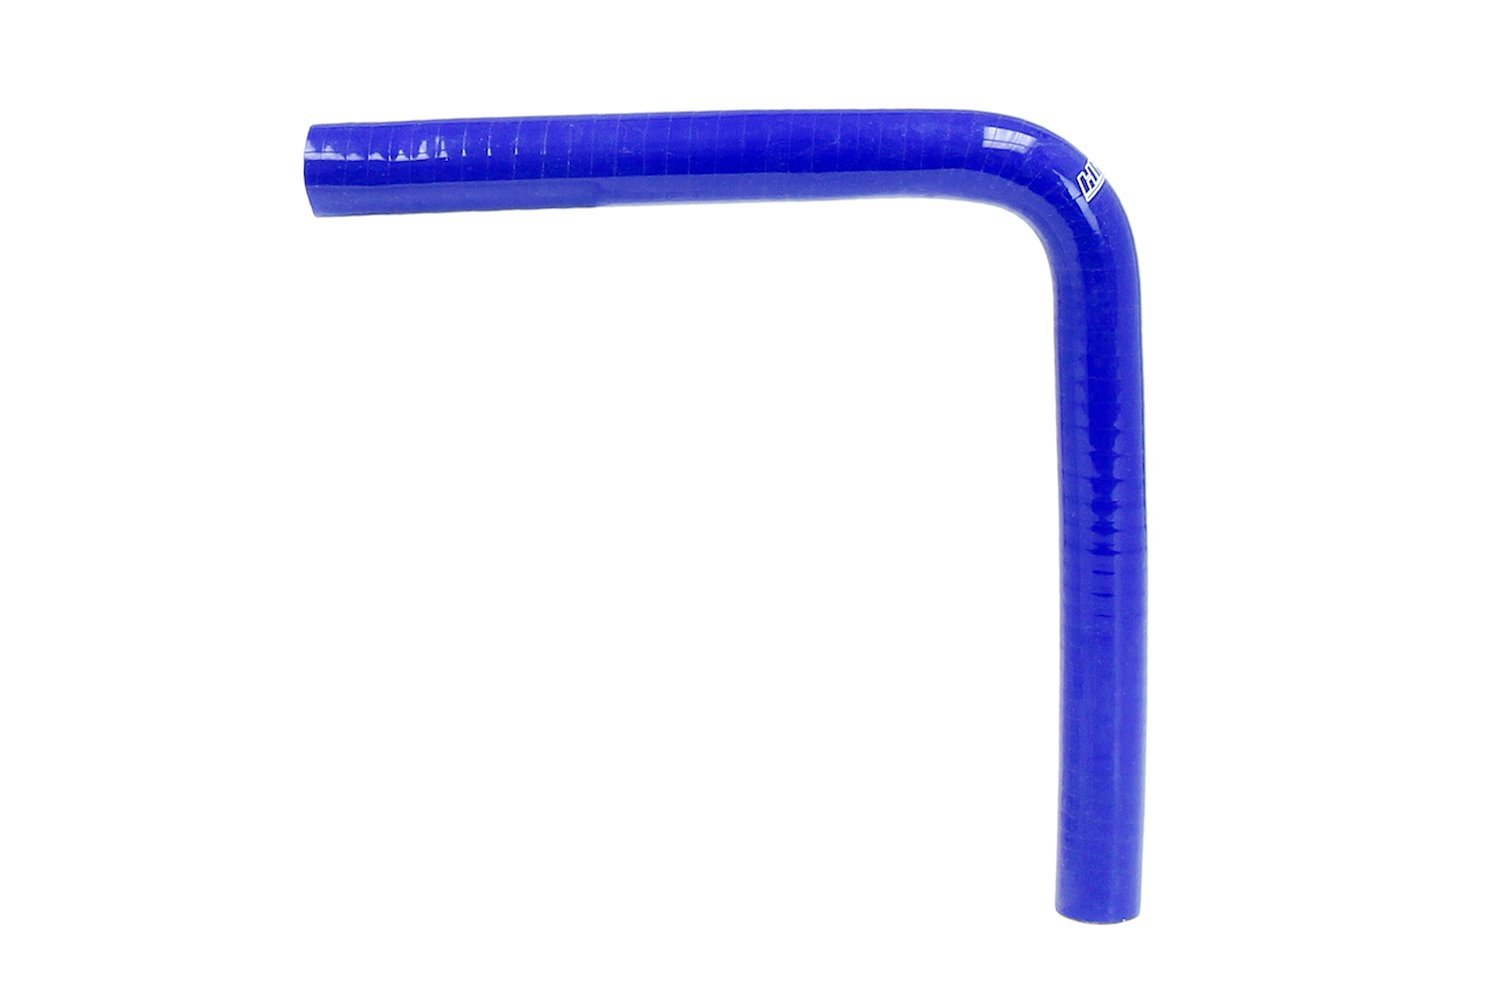 HTSEC90-075-L10-BLUE Silicone 90-Degree Elbow Hose, High-Temp 4-Ply Reinforced, 3/4 in. ID, 10 in. Leg, Blue